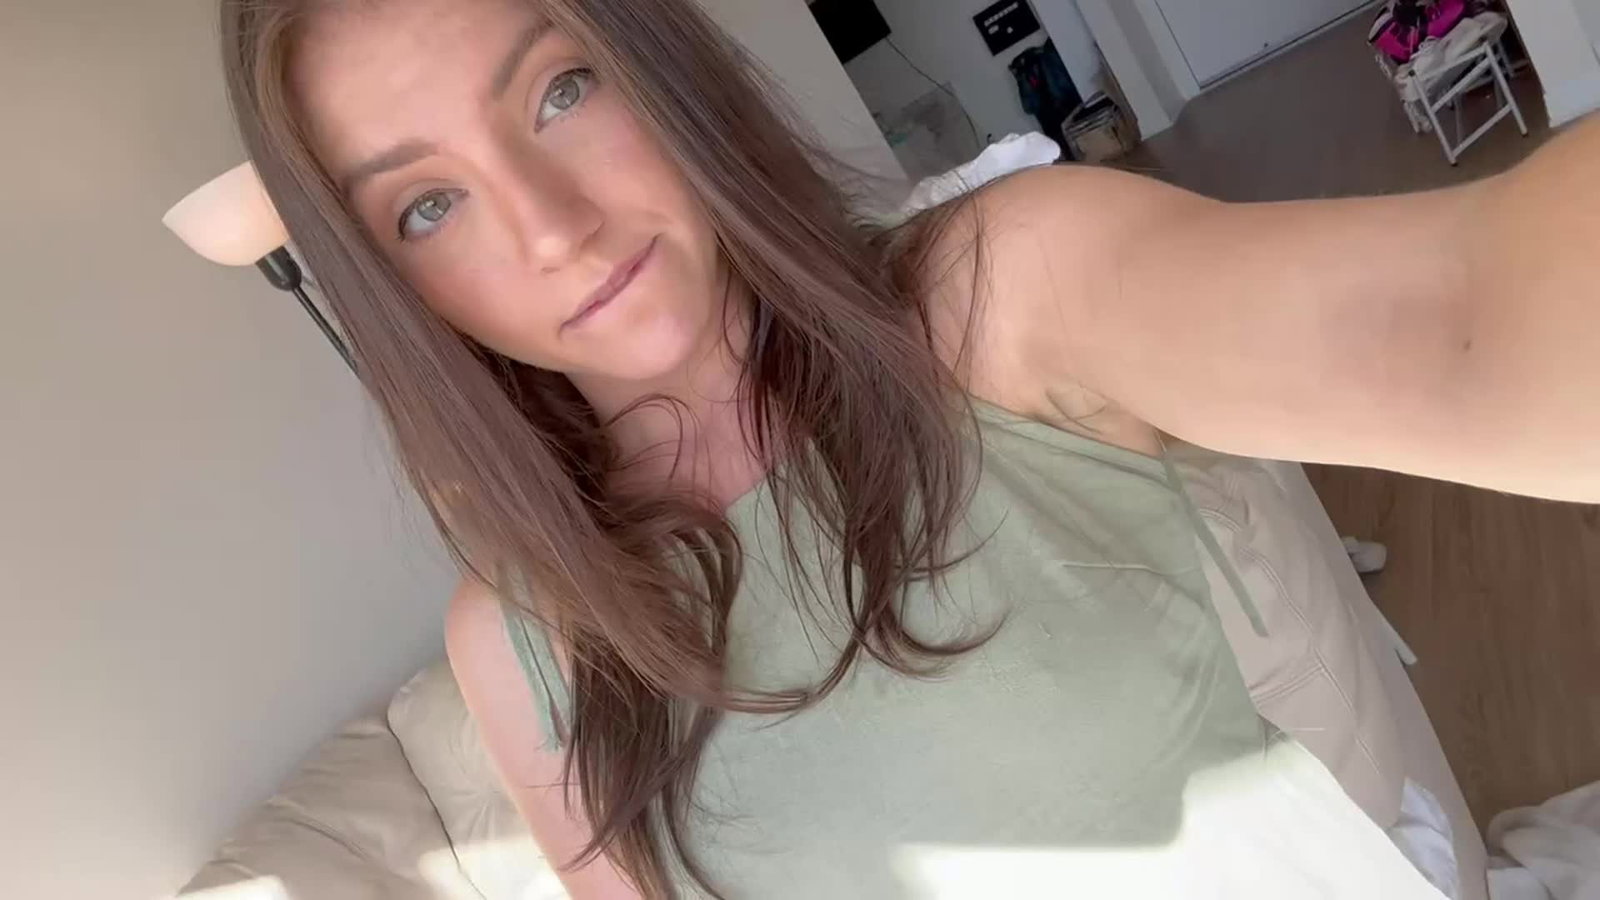 Video by Slutslover with the username @slutslover,  April 16, 2023 at 10:20 AM. The post is about the topic Pussy Perfection and the text says 'Teen Pussy Perfection

#pussy #pussiesoftheworld #pussyperfection #perfectpussy

Submit your perfect pussy picture and be featured!'